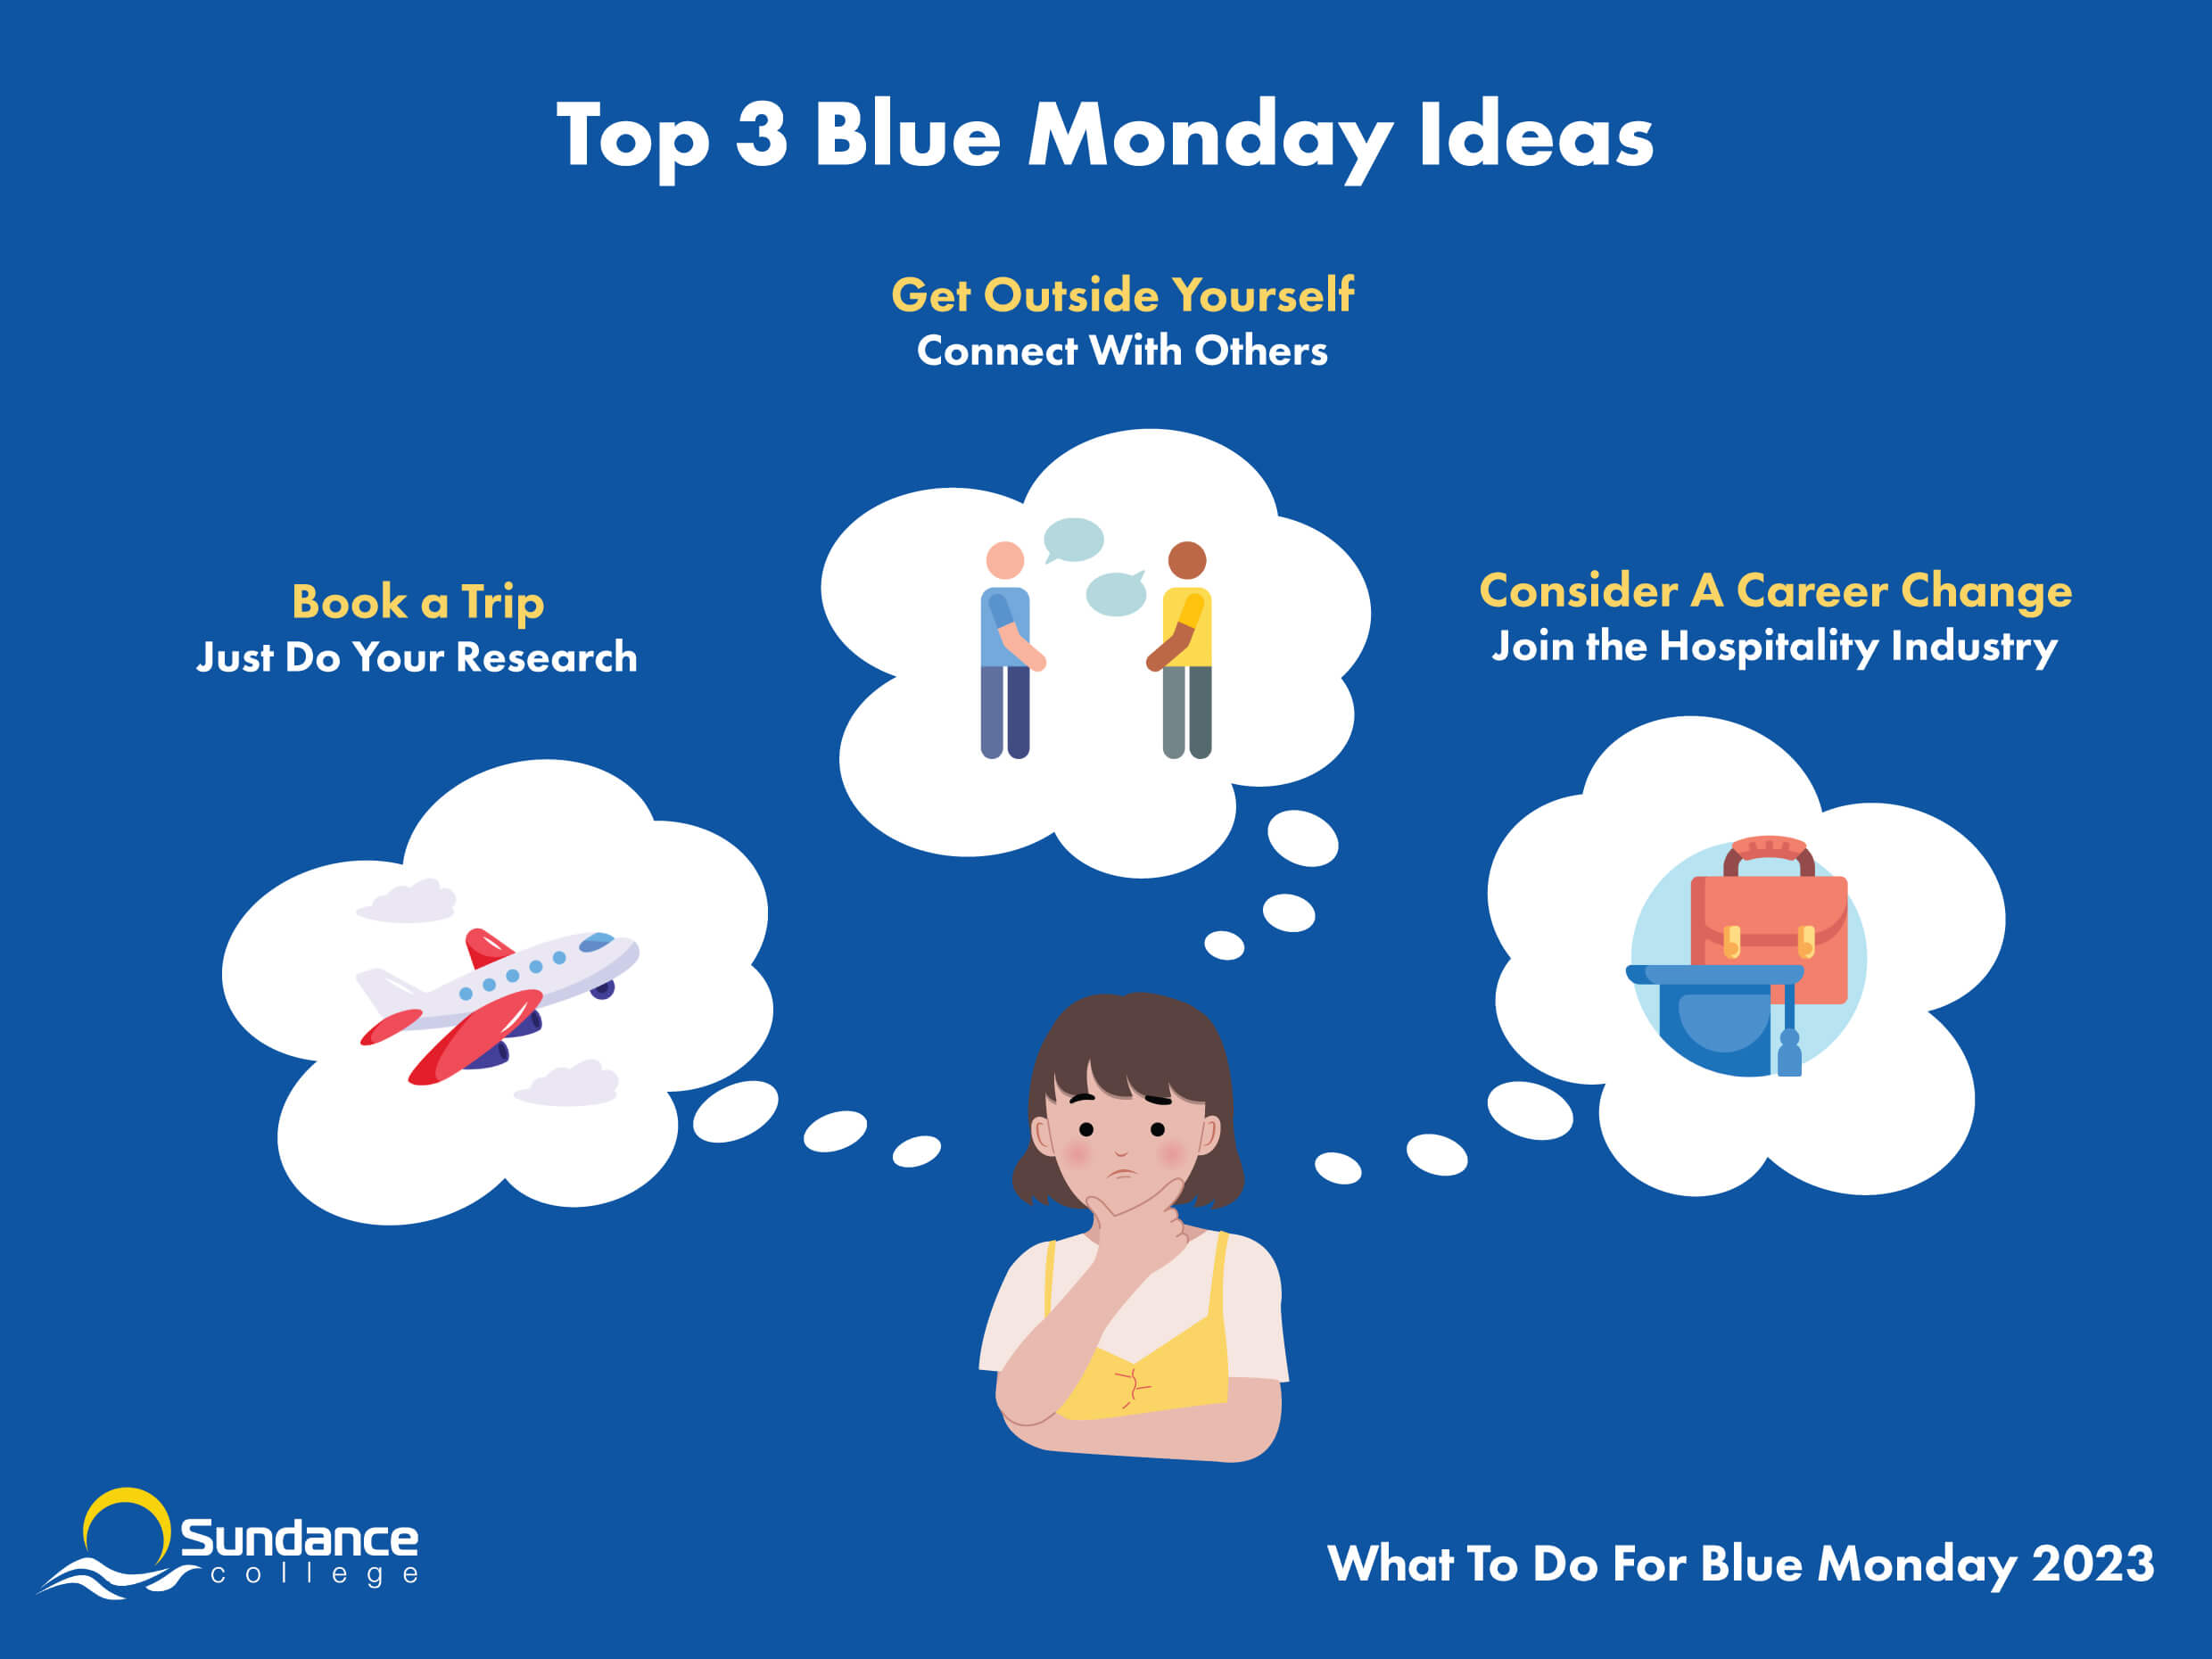 infographic stating your top 3 options for Blue Monday 2023, including getting outside yourself, booking a trip, and changing your career to hospitality business management.